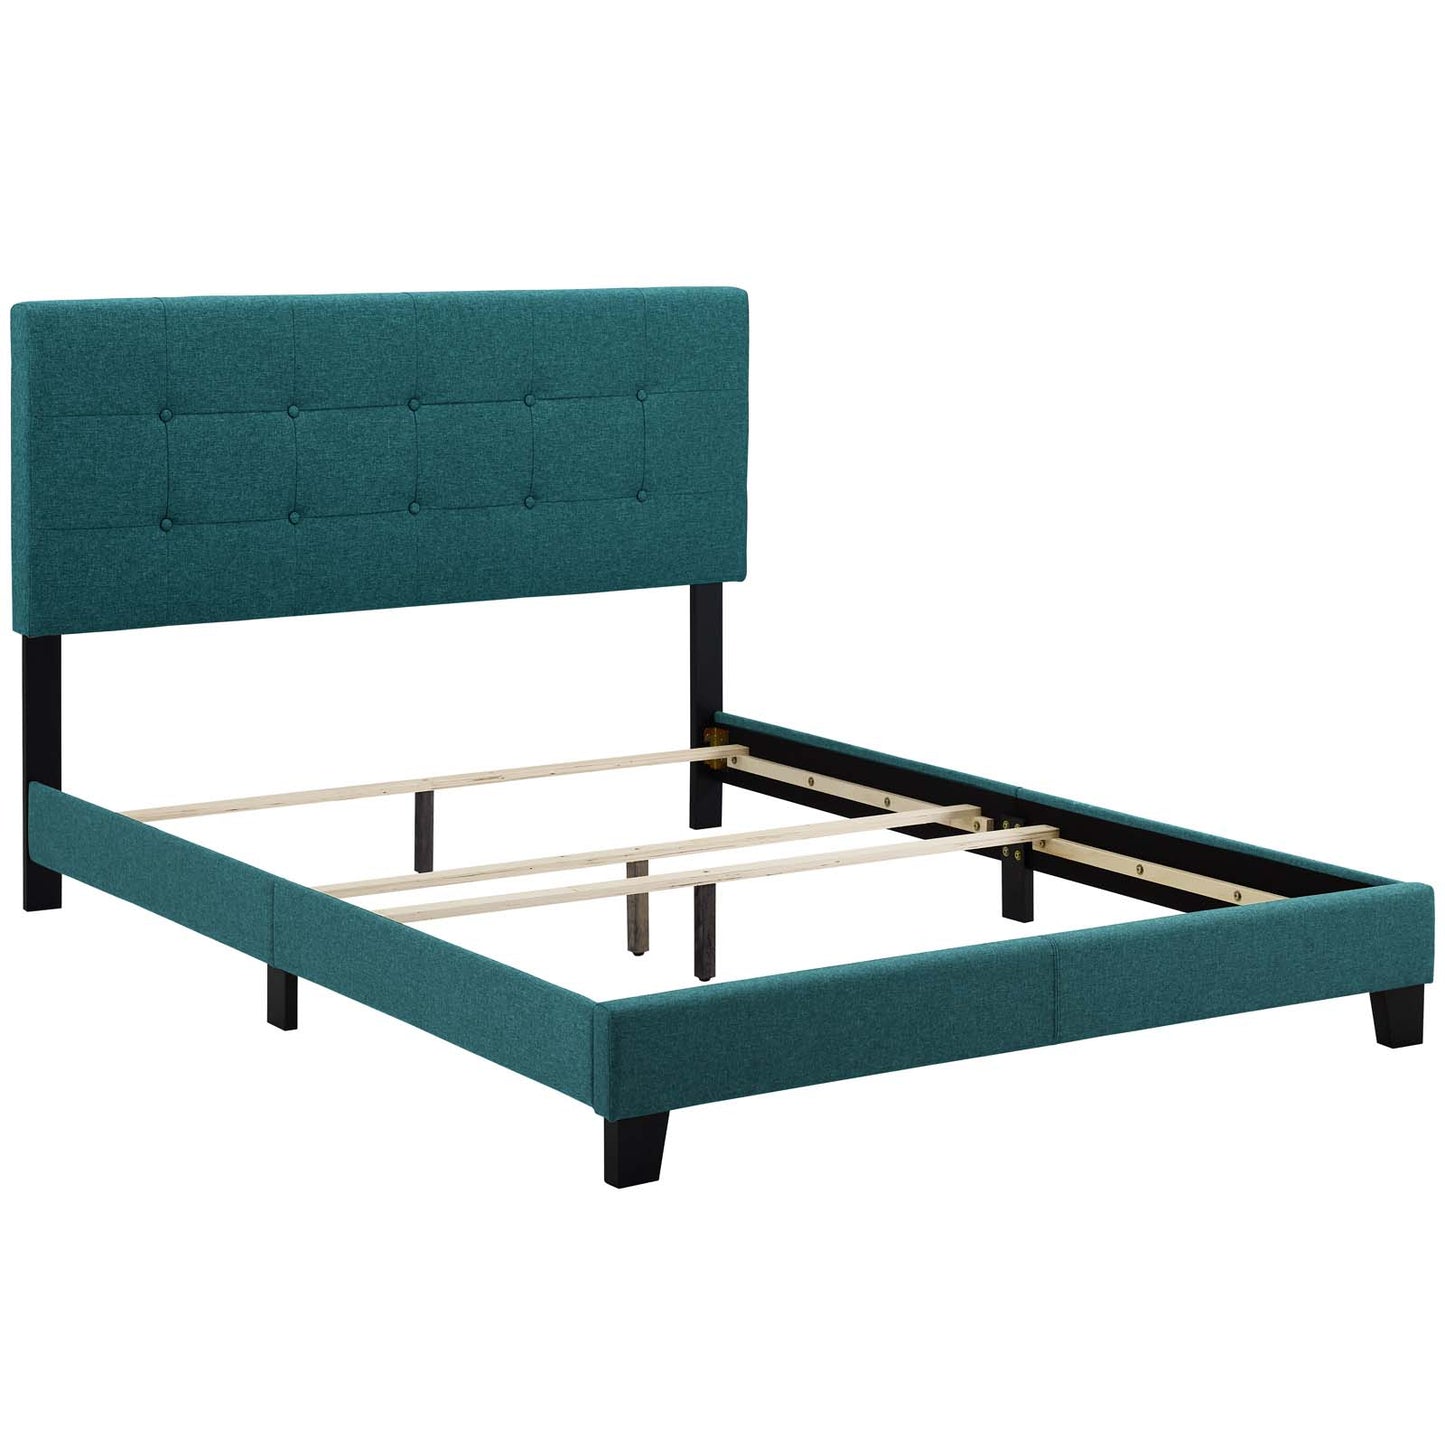 Modway Amira King Upholstered Fabric Bed - MOD-6002